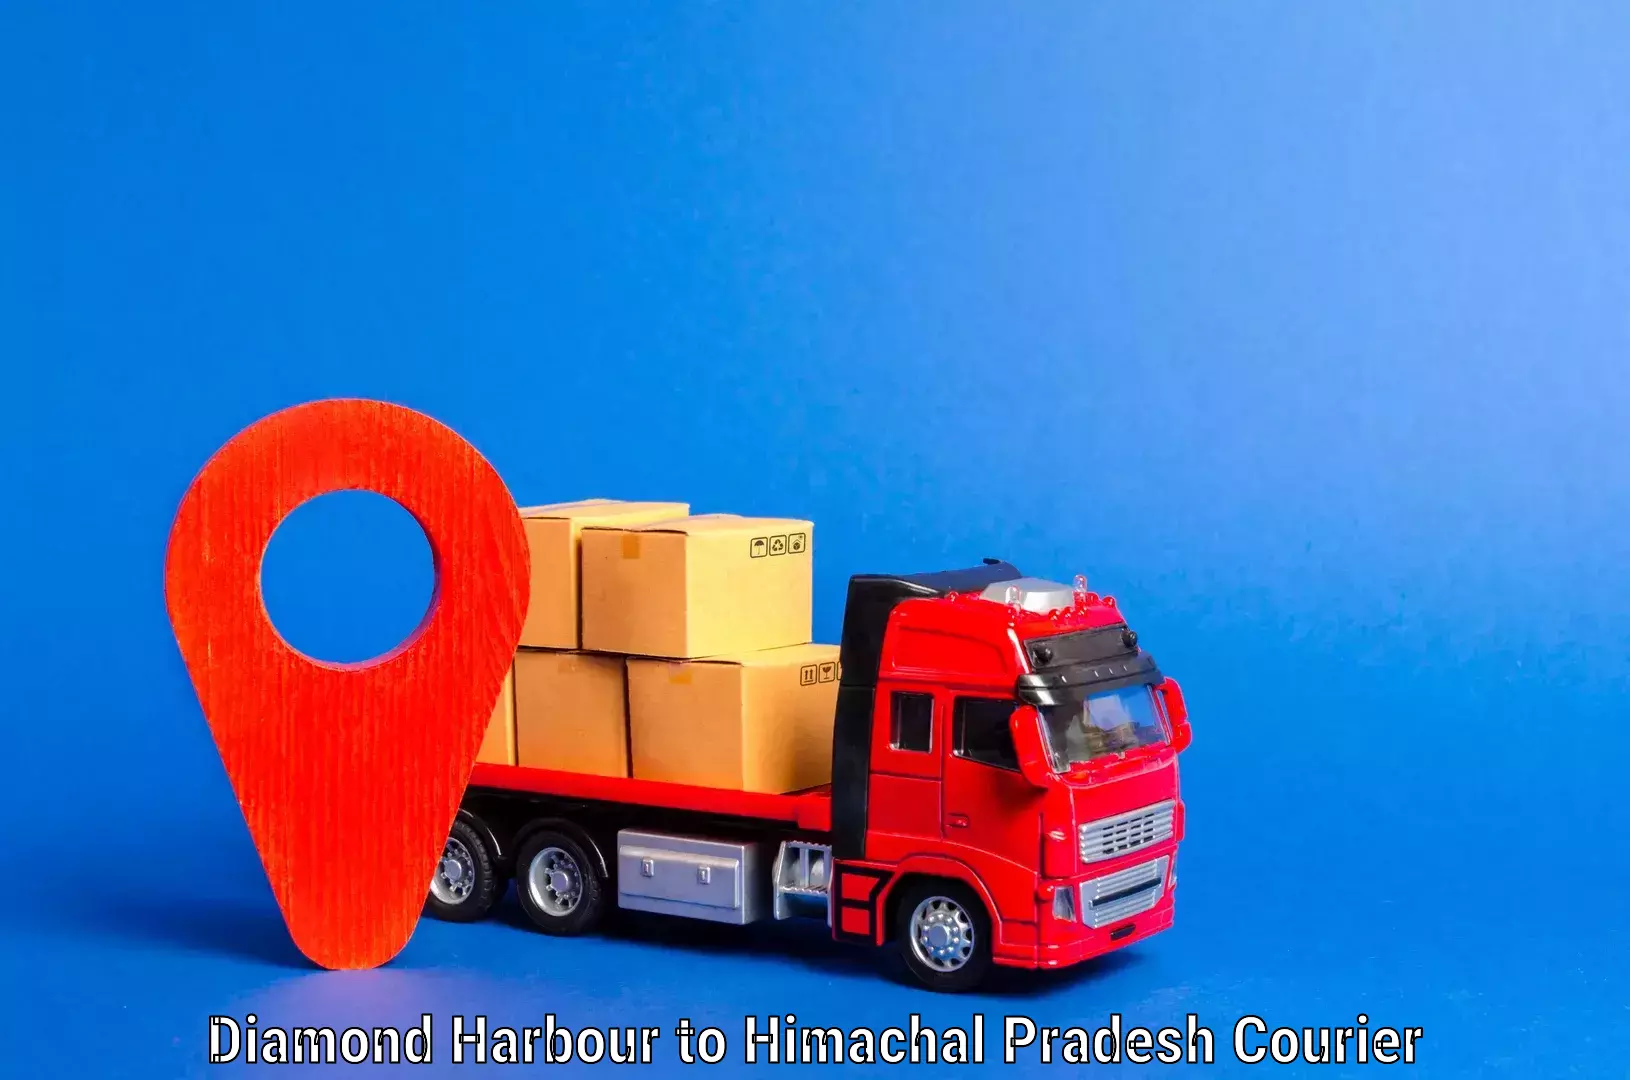 Home relocation experts Diamond Harbour to Himachal Pradesh